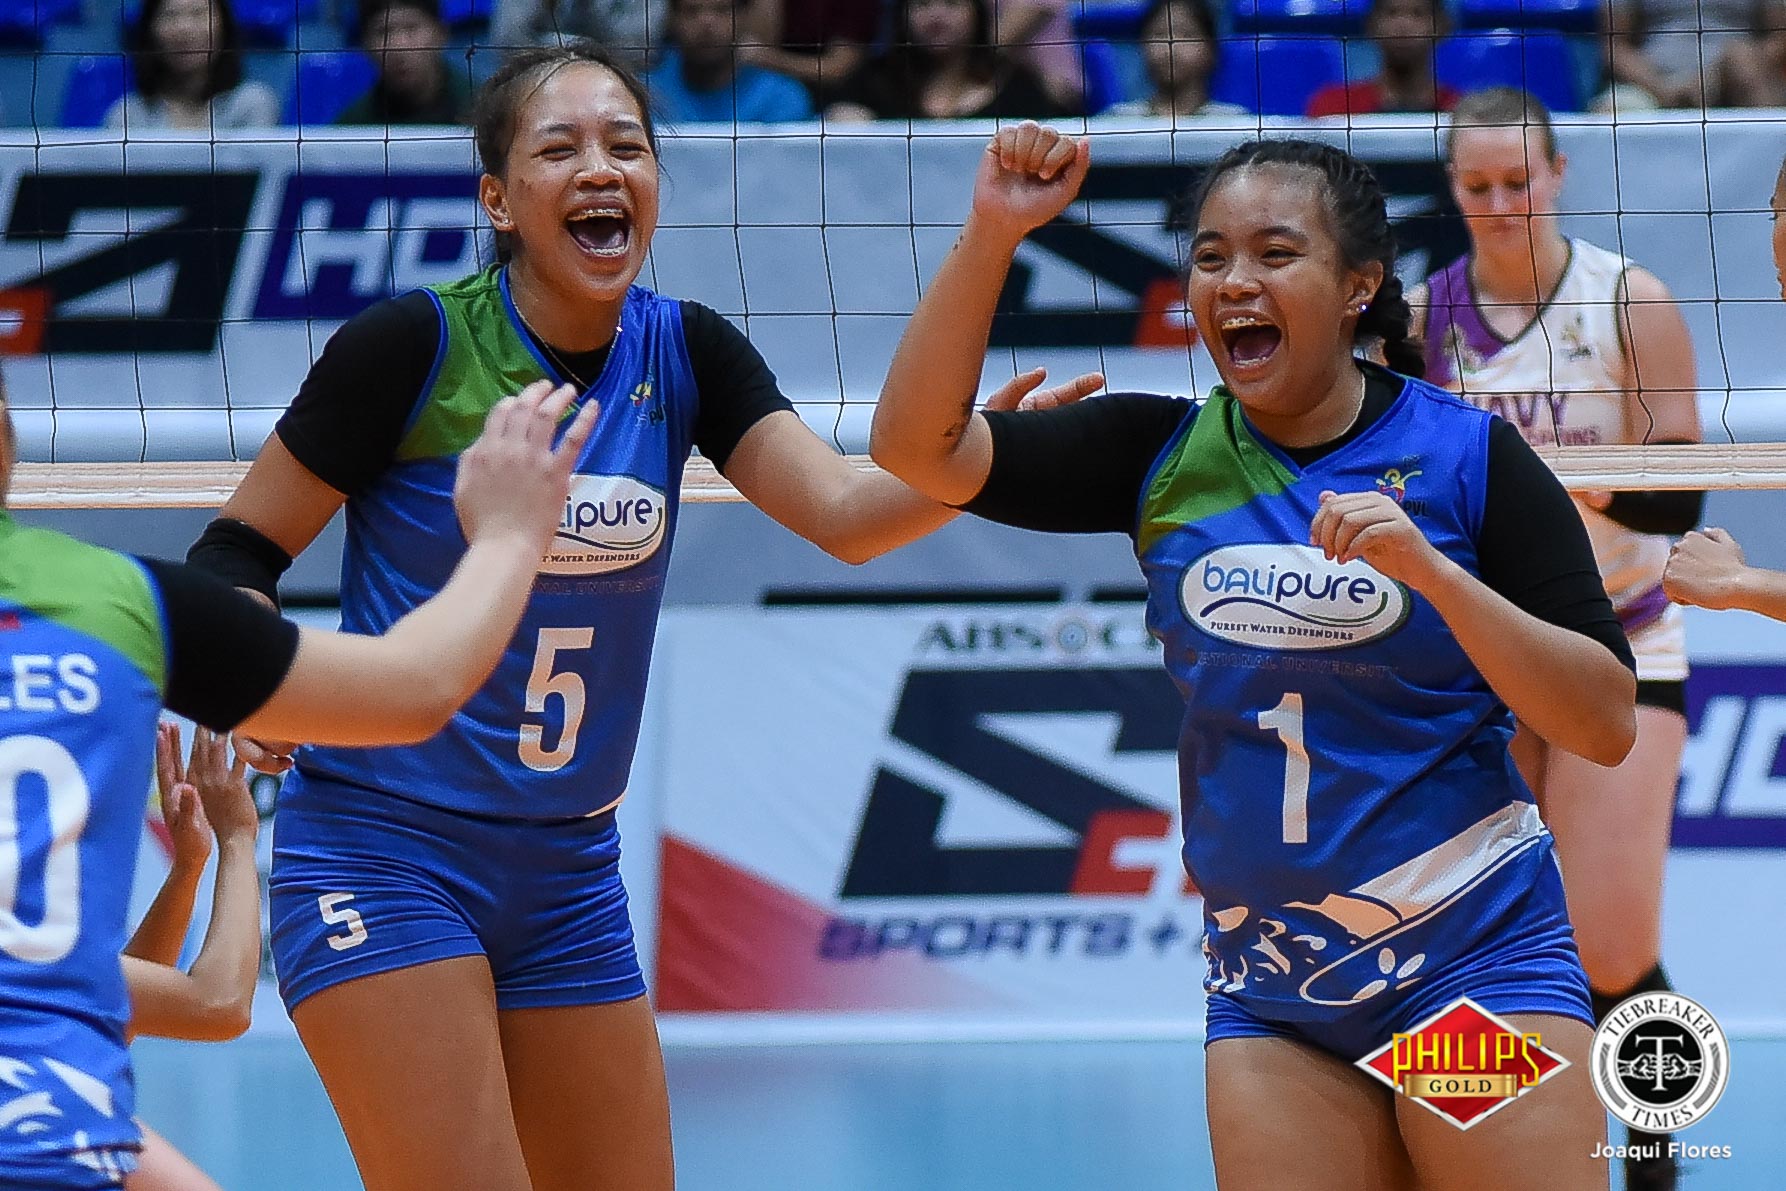 PVL-2018-Iriga-Navy-vs.-BaliPure-Diolan-Doria-7679 Babes Castillo satisfied with Lady Bullpups' first outing with Bali Pure News NU PVL Volleyball  - philippine sports news